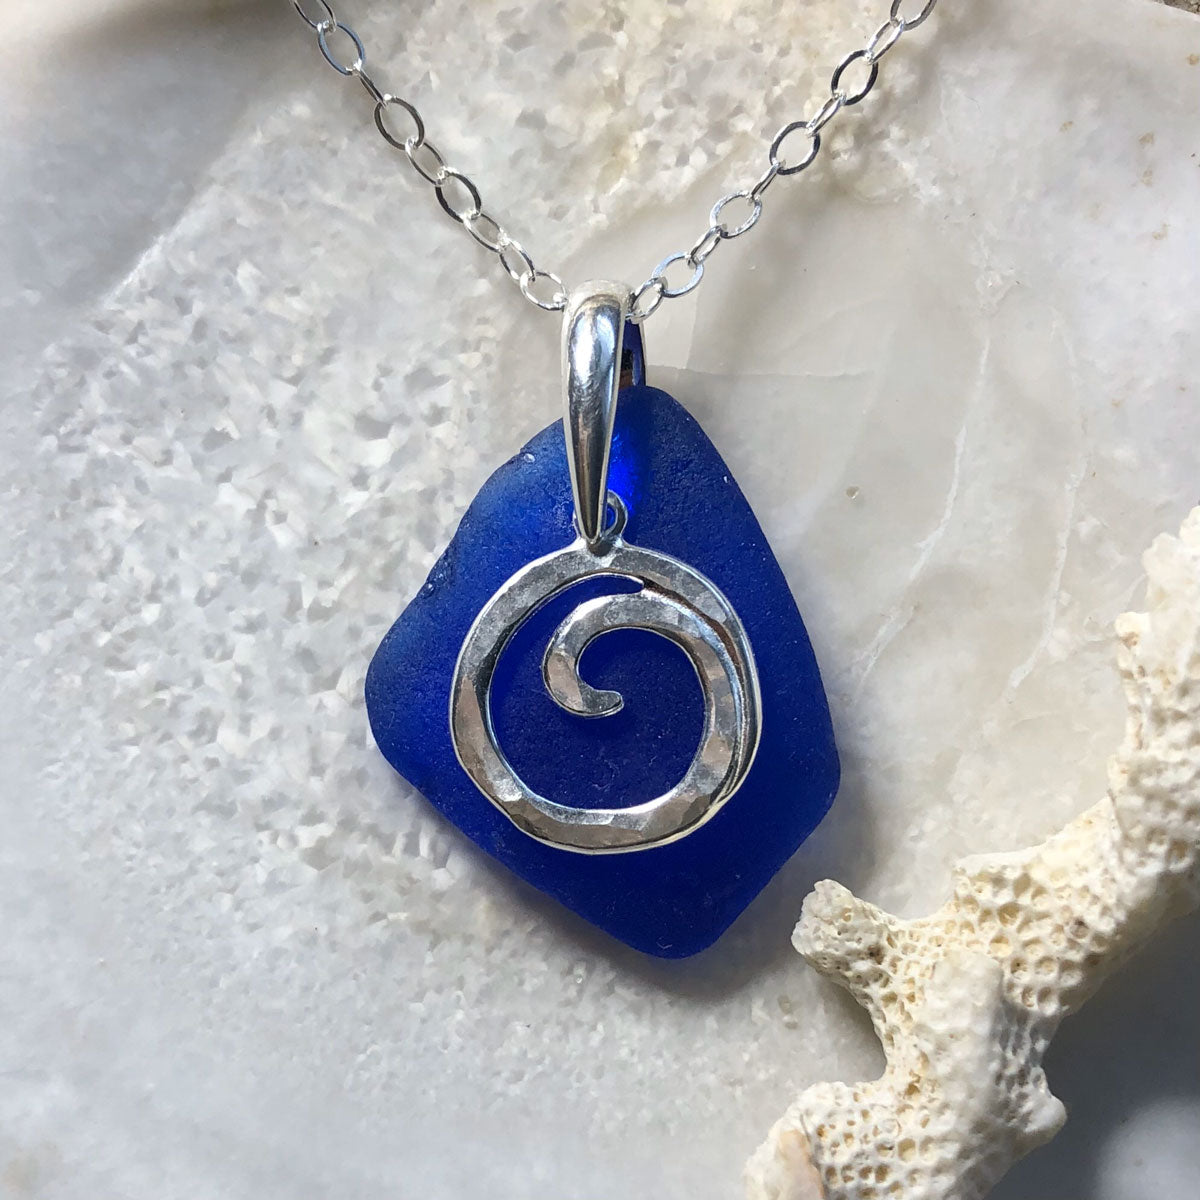 Cobalt Blue Sea Glass Necklace with a Sterling Silver Ocean Wave